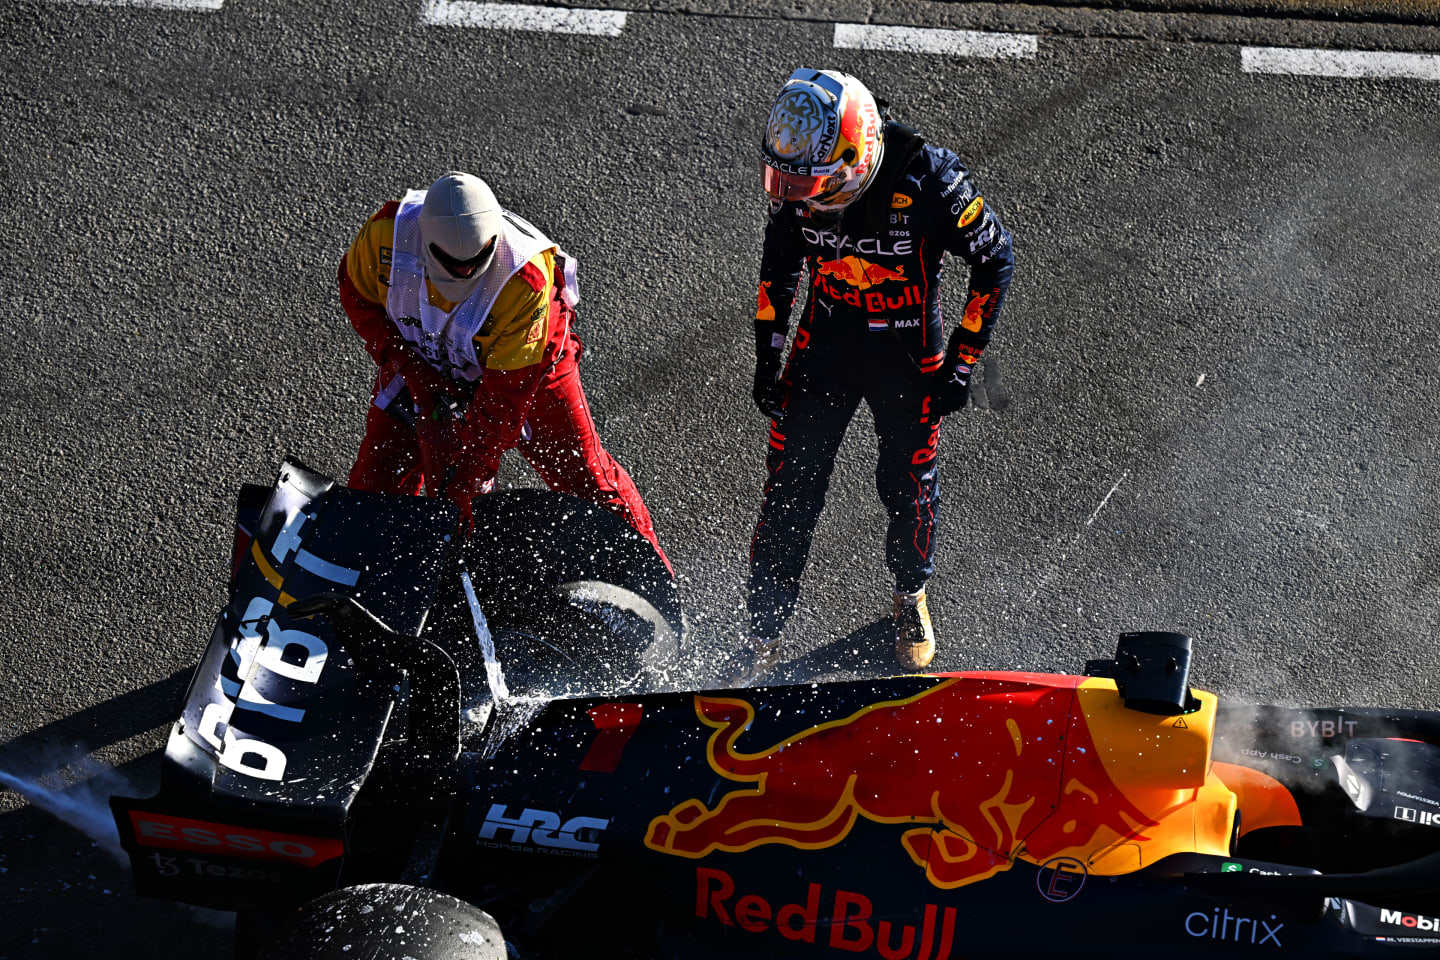 MELBOURNE, AUSTRALIA - APRIL 10: Max Verstappen of the Netherlands and Oracle Red Bull Racing and track marshals tend to the fire in his car after he retired from the race during the F1 Grand Prix of Australia at Melbourne Grand Prix Circuit on April 10, 2022 in Melbourne, Australia. (Photo by Clive Mason/Getty Images)